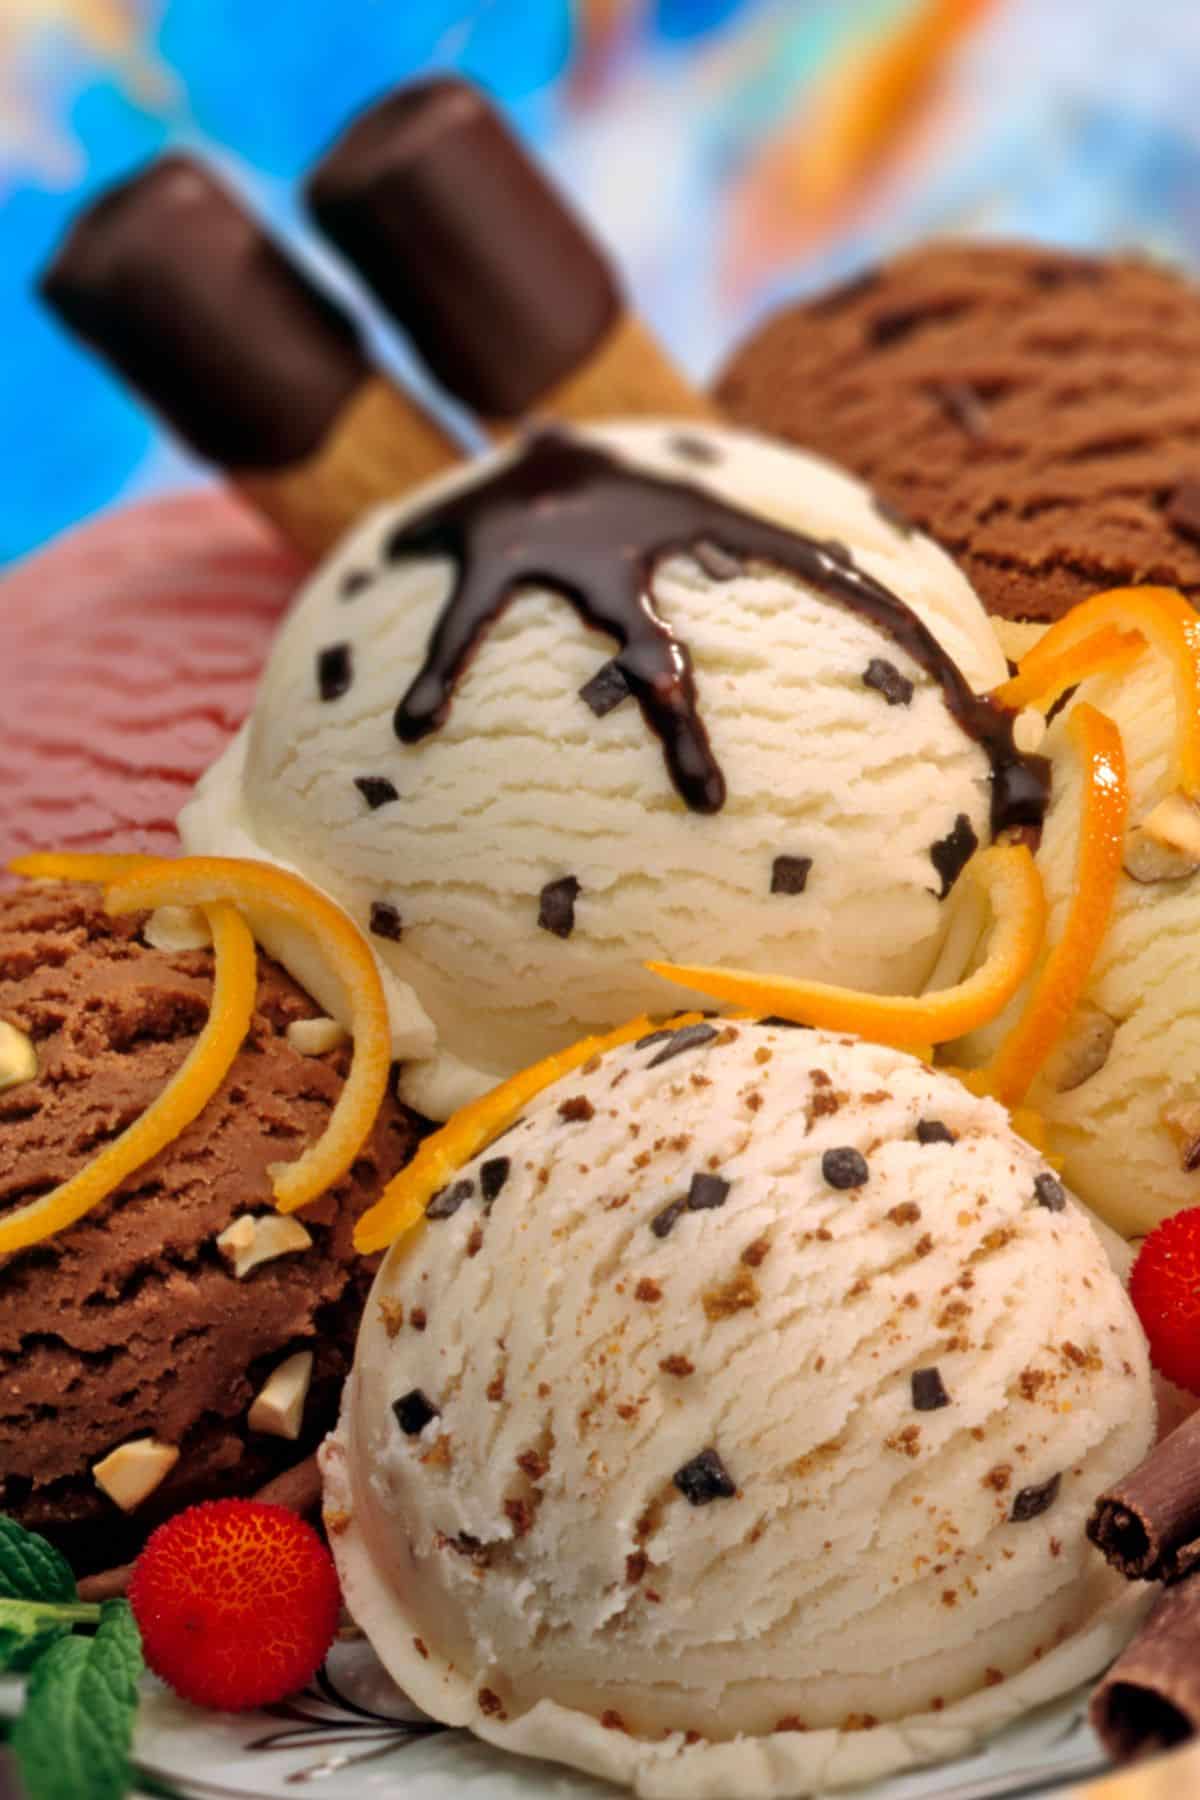 a variety of ice cream with toppings and chocolate.